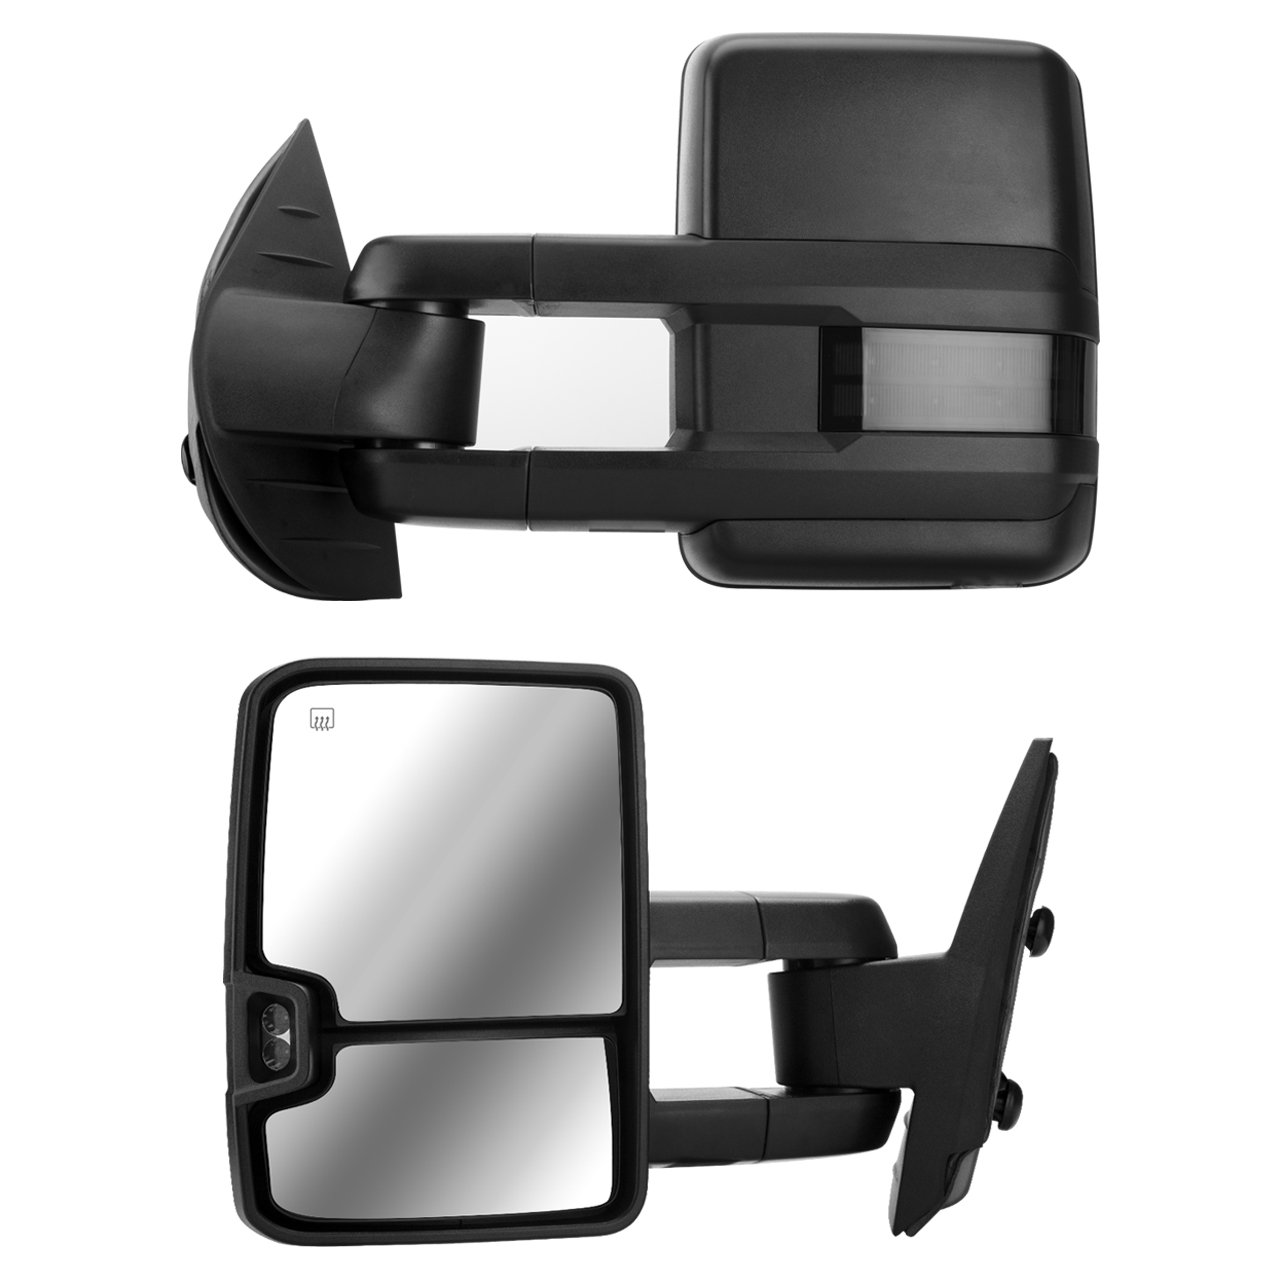 DEDC Tow Mirrors Pair Fit for Chevy Silverado 1500 2500 3500 GMC Sierra  2007 2008 2009 2010 2011 2012 2013- Buy Online in Bosnia and Herzegovina at  Desertcart - 52321794.